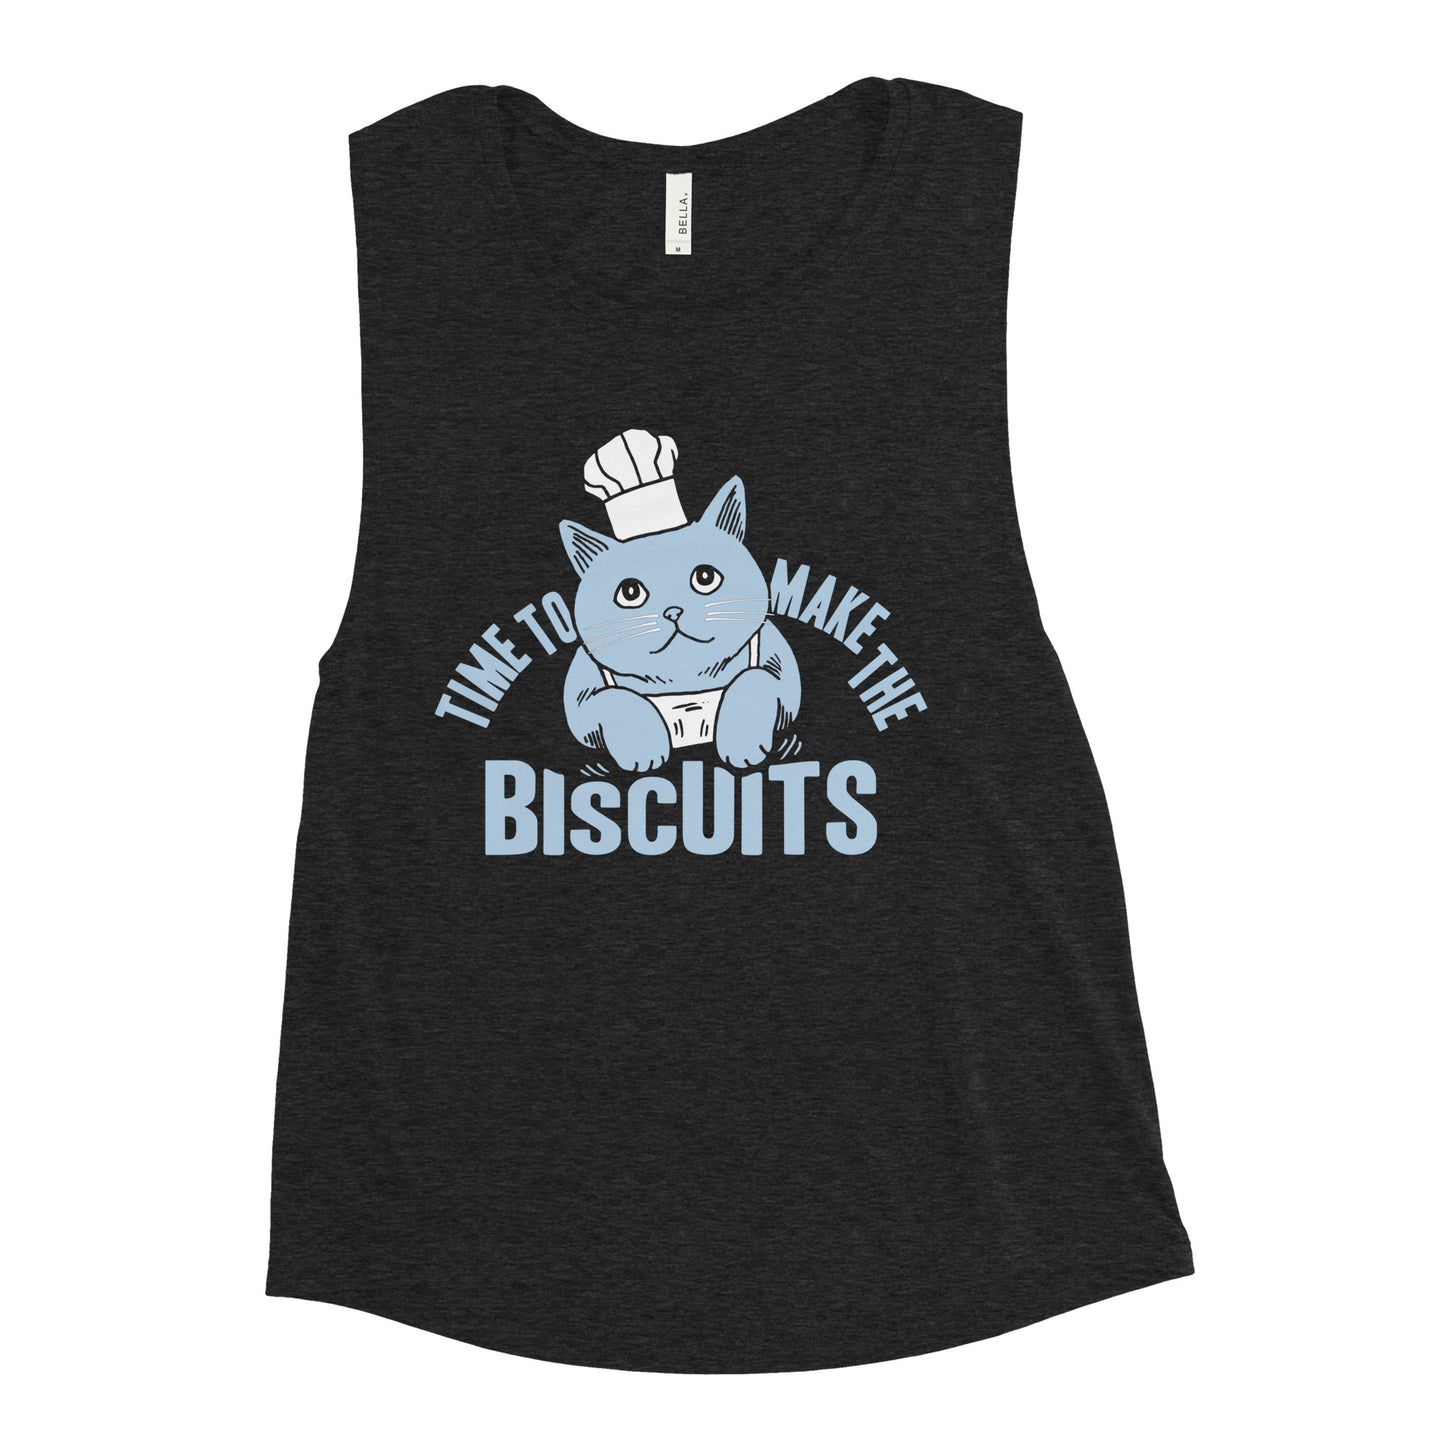 Time To Make The Biscuits Women's Muscle Tank